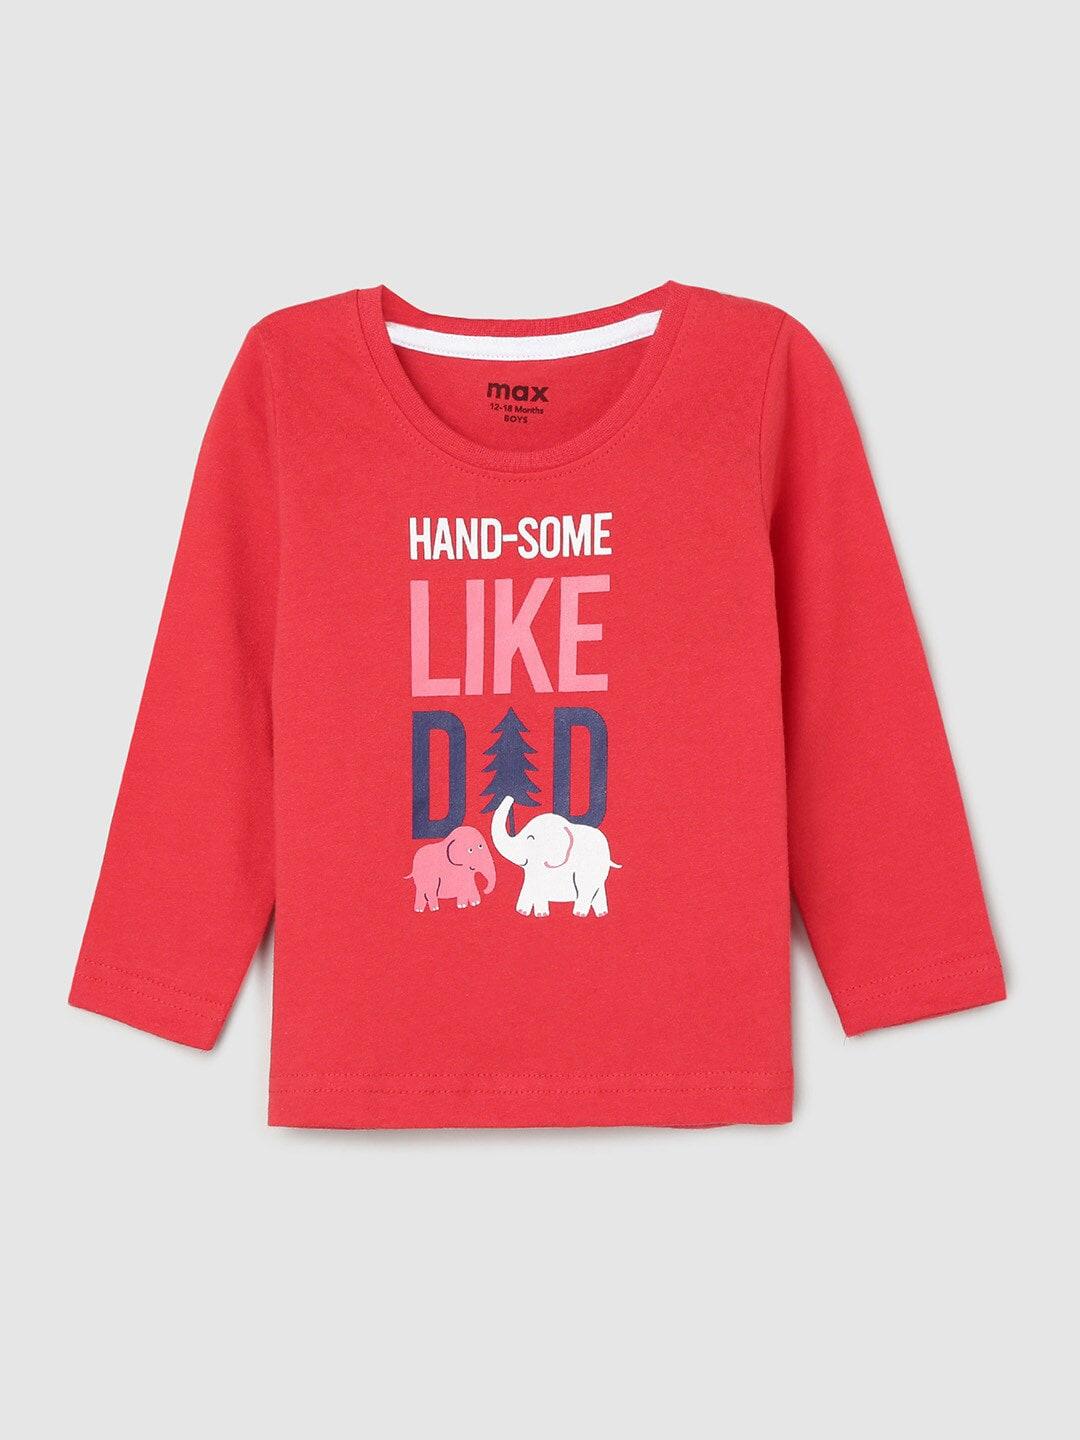 max-boys-red-typography-printed-cotton-t-shirt